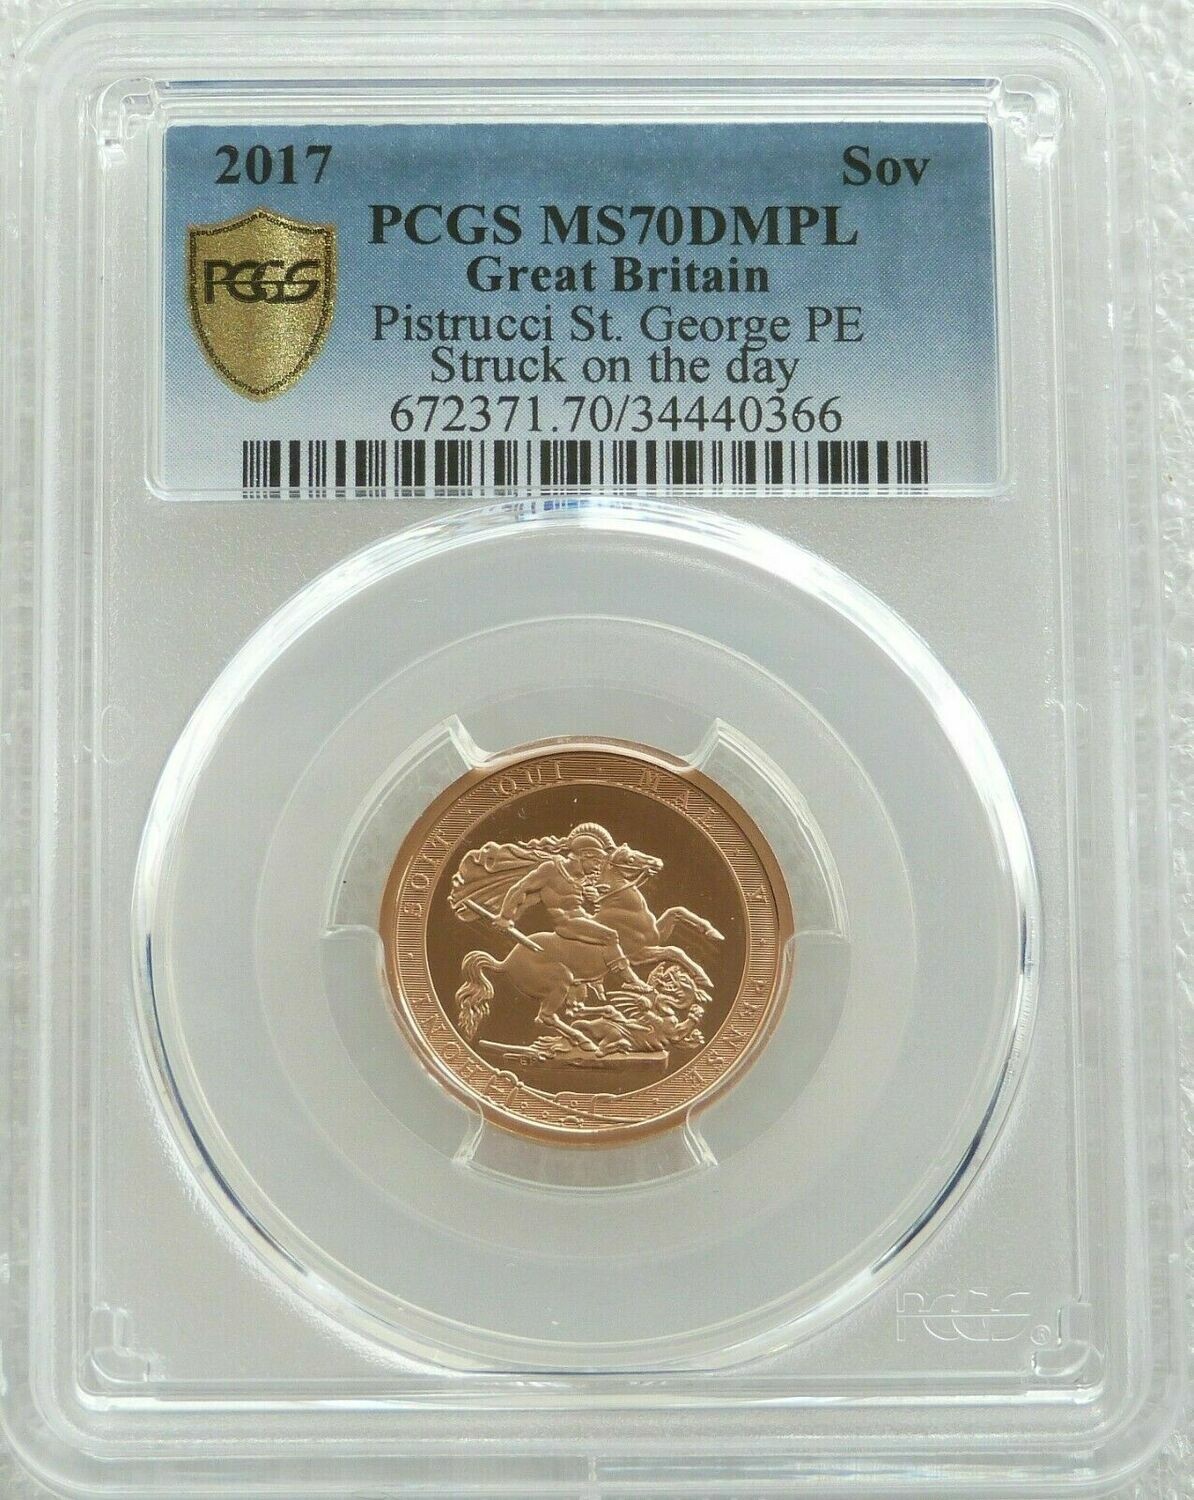 2017 Struck on the Day Pistrucci Full Sovereign Gold Coin PCGS MS70 DMPL - Plain Edge